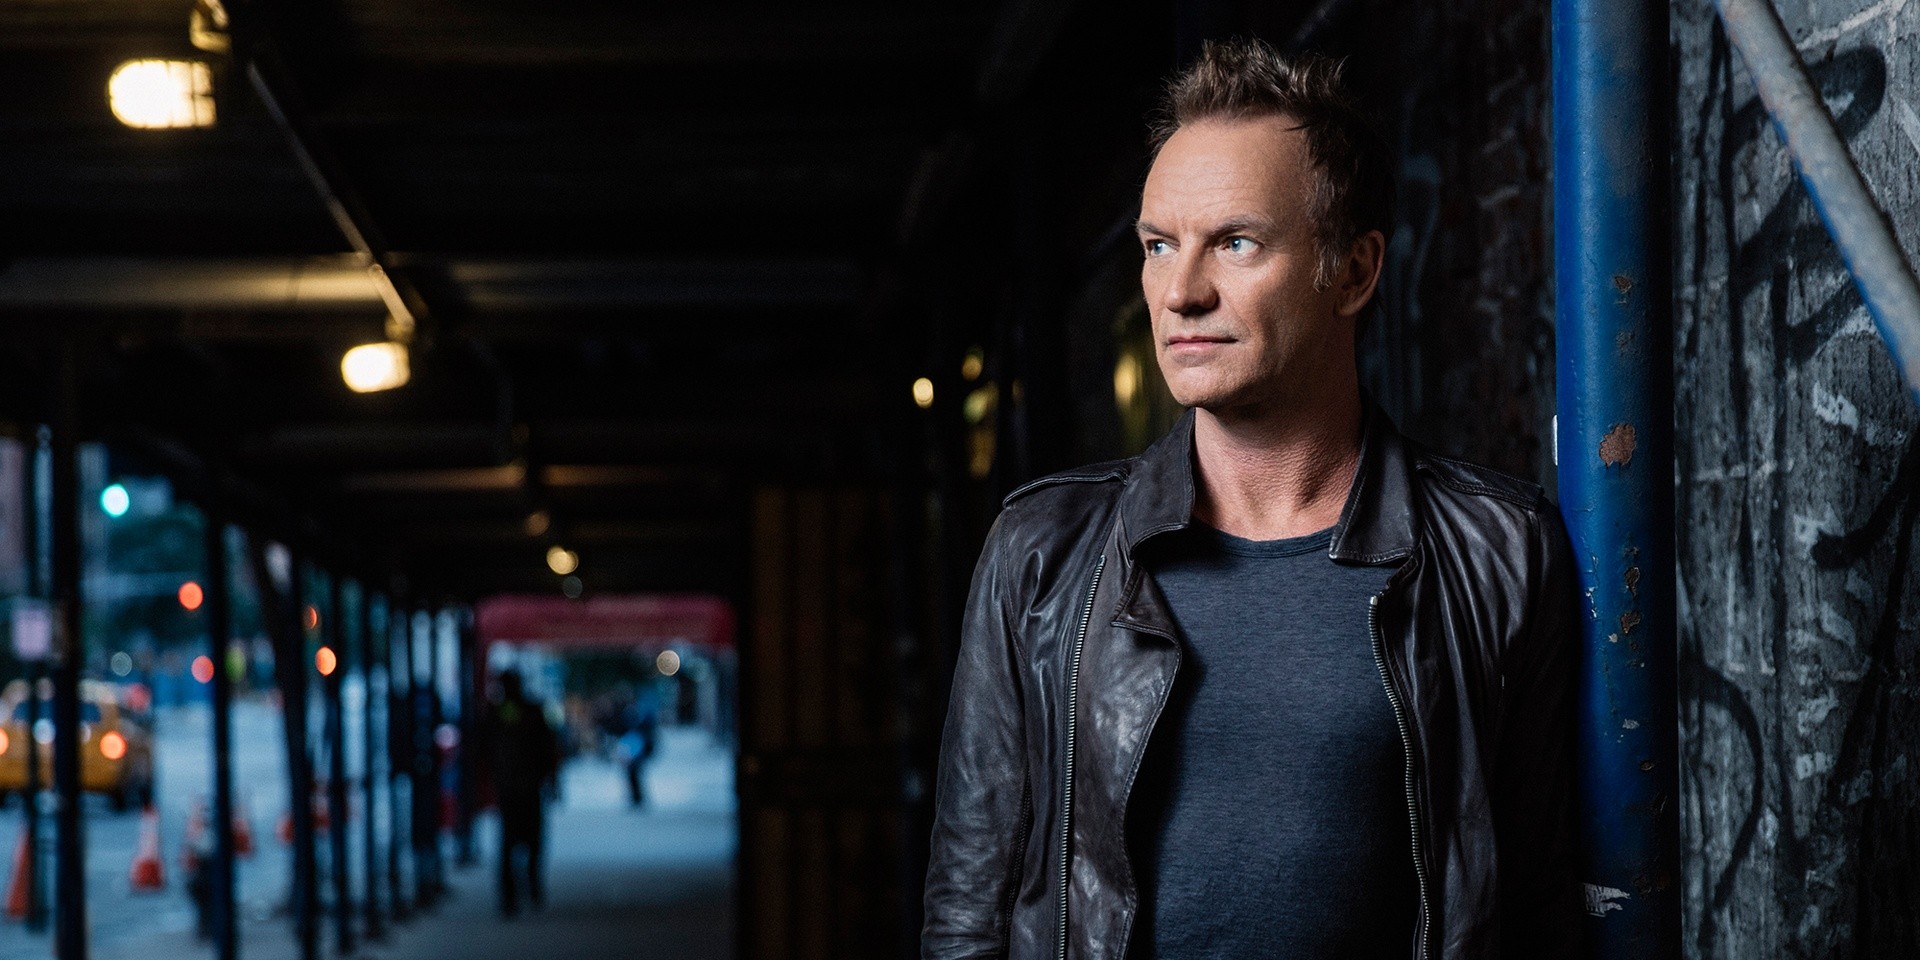 Sting to return to Singapore in 2017